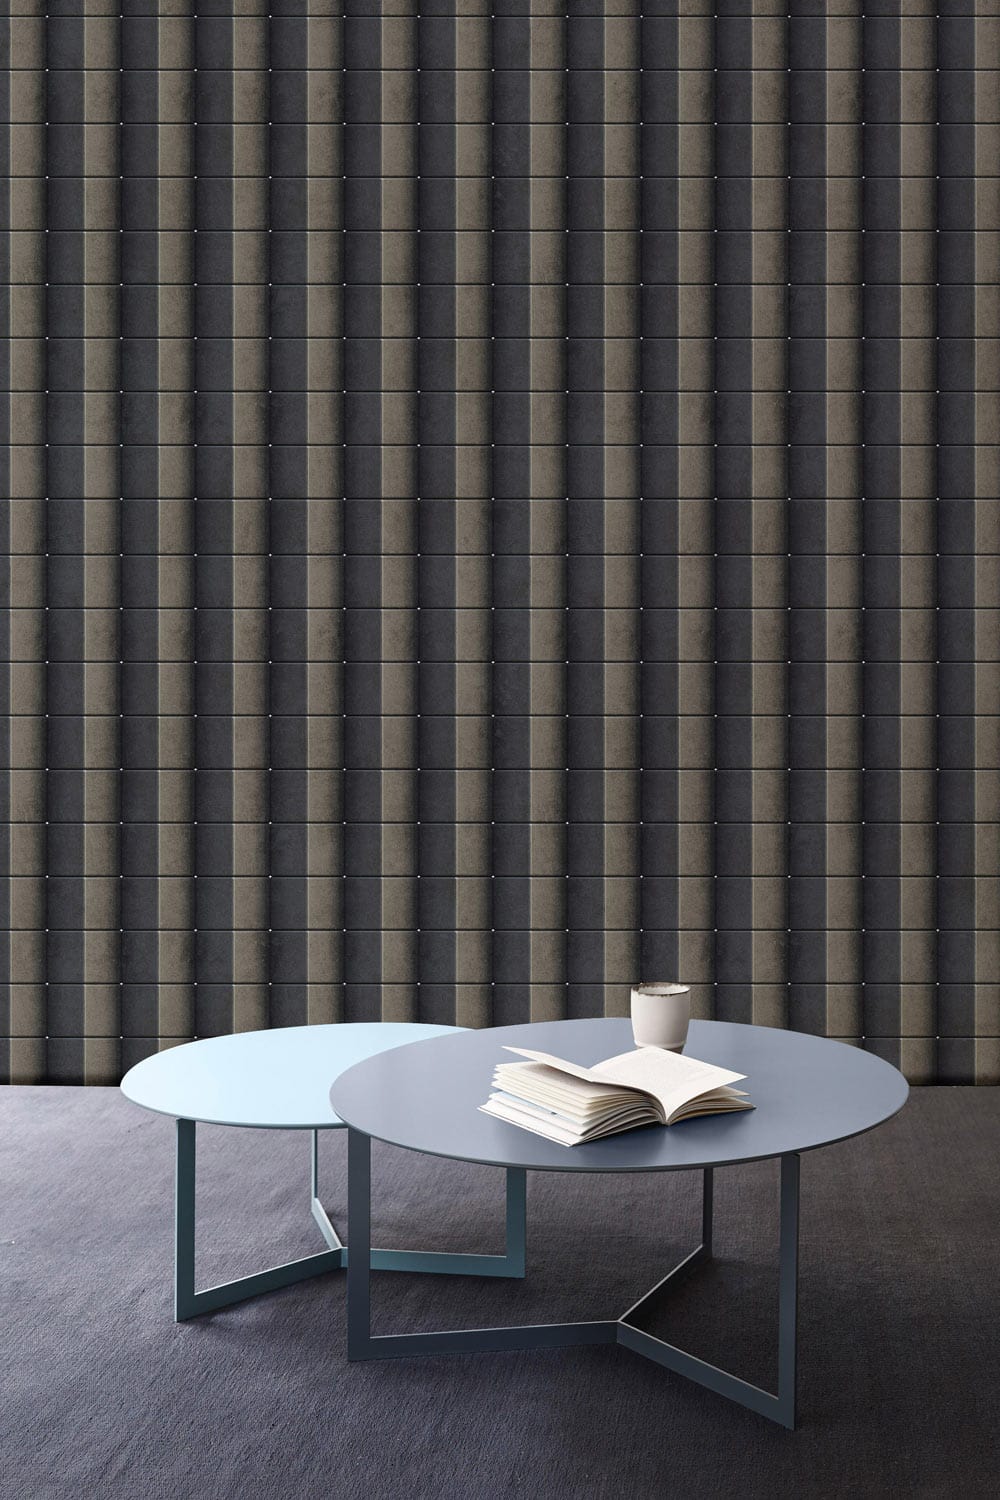 Metal wallpaper for the living room with an industrial flair.